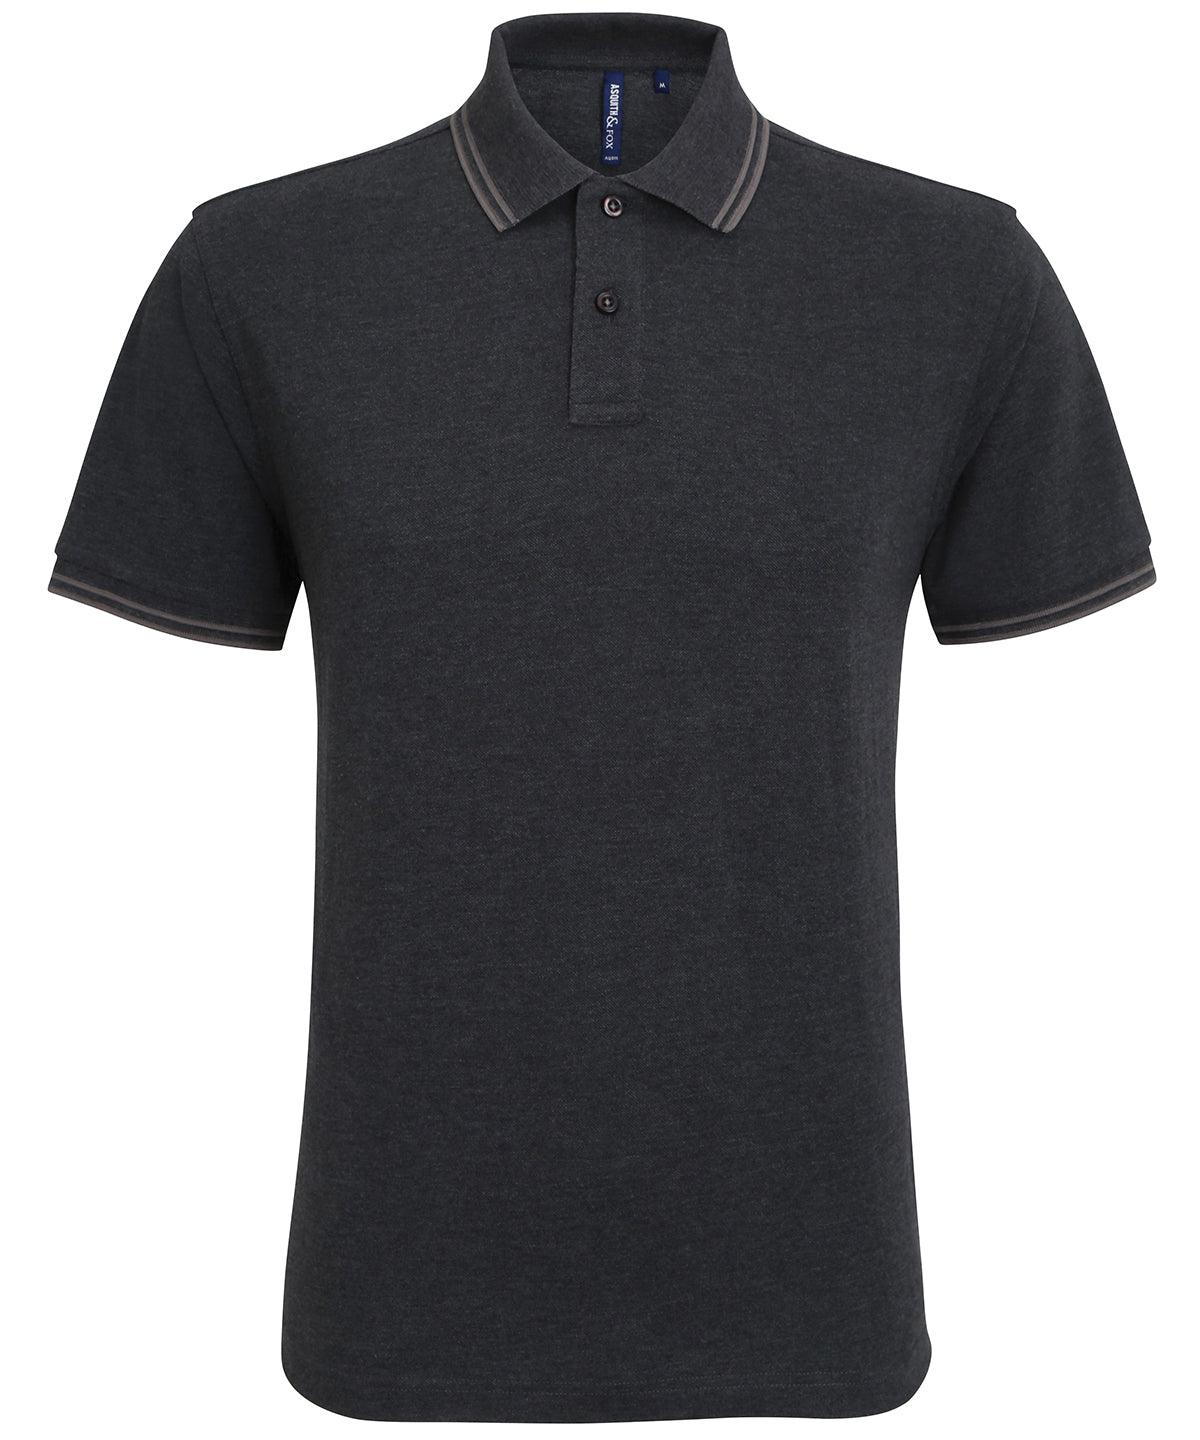 Men's classic fit tipped polo